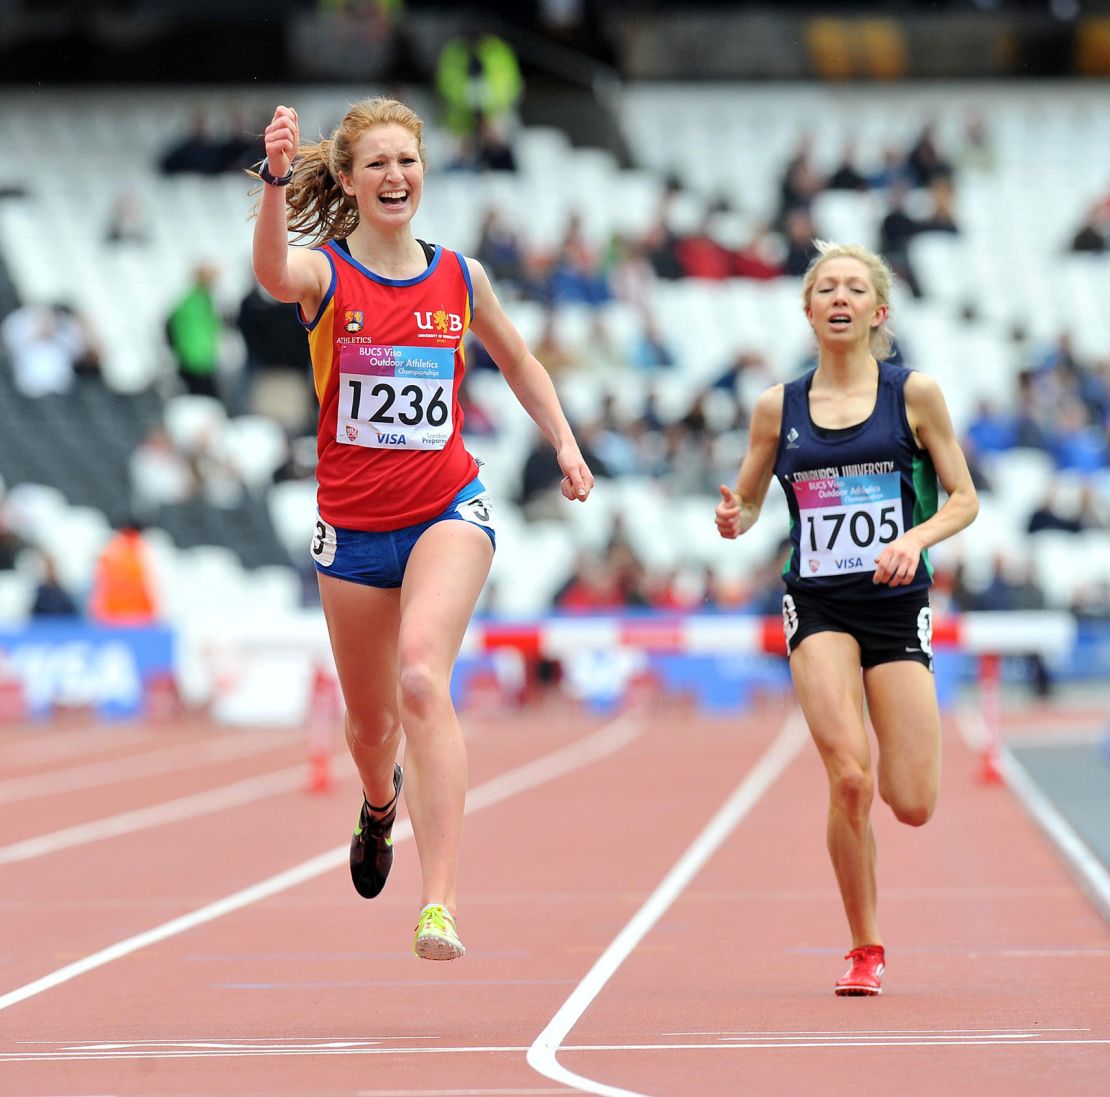 Pippa Woolven won the Women's 2000m Steeplechase at the British Universities and Colleges Sports Championships at the Olympic Stadium, London in 2012.